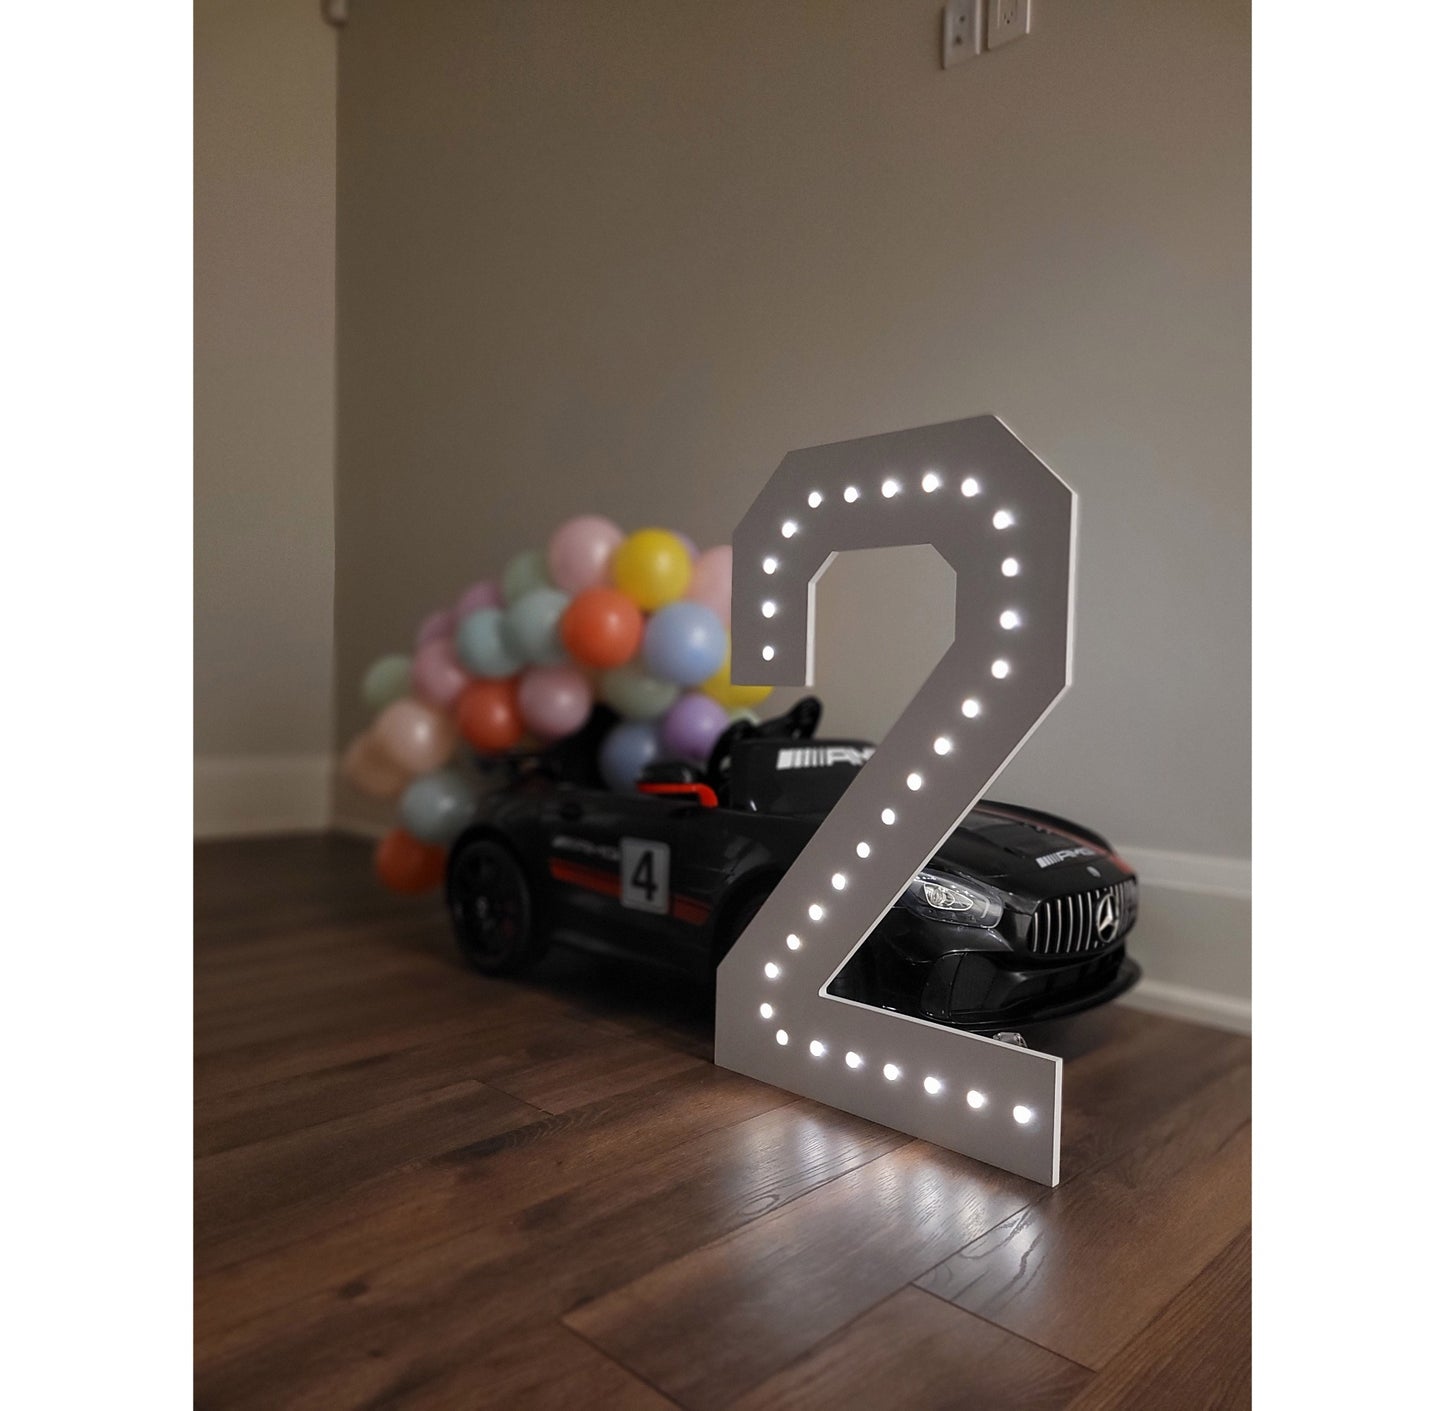 light up letters, light, LED Numbers, LED Marquee, LED alphabet, large numbers, happy birthday, first birthday, event decor, birthday ideas, birthday decorations, Marquee light up letters, Battery power LED, Birthday letters, Birthday Numbers